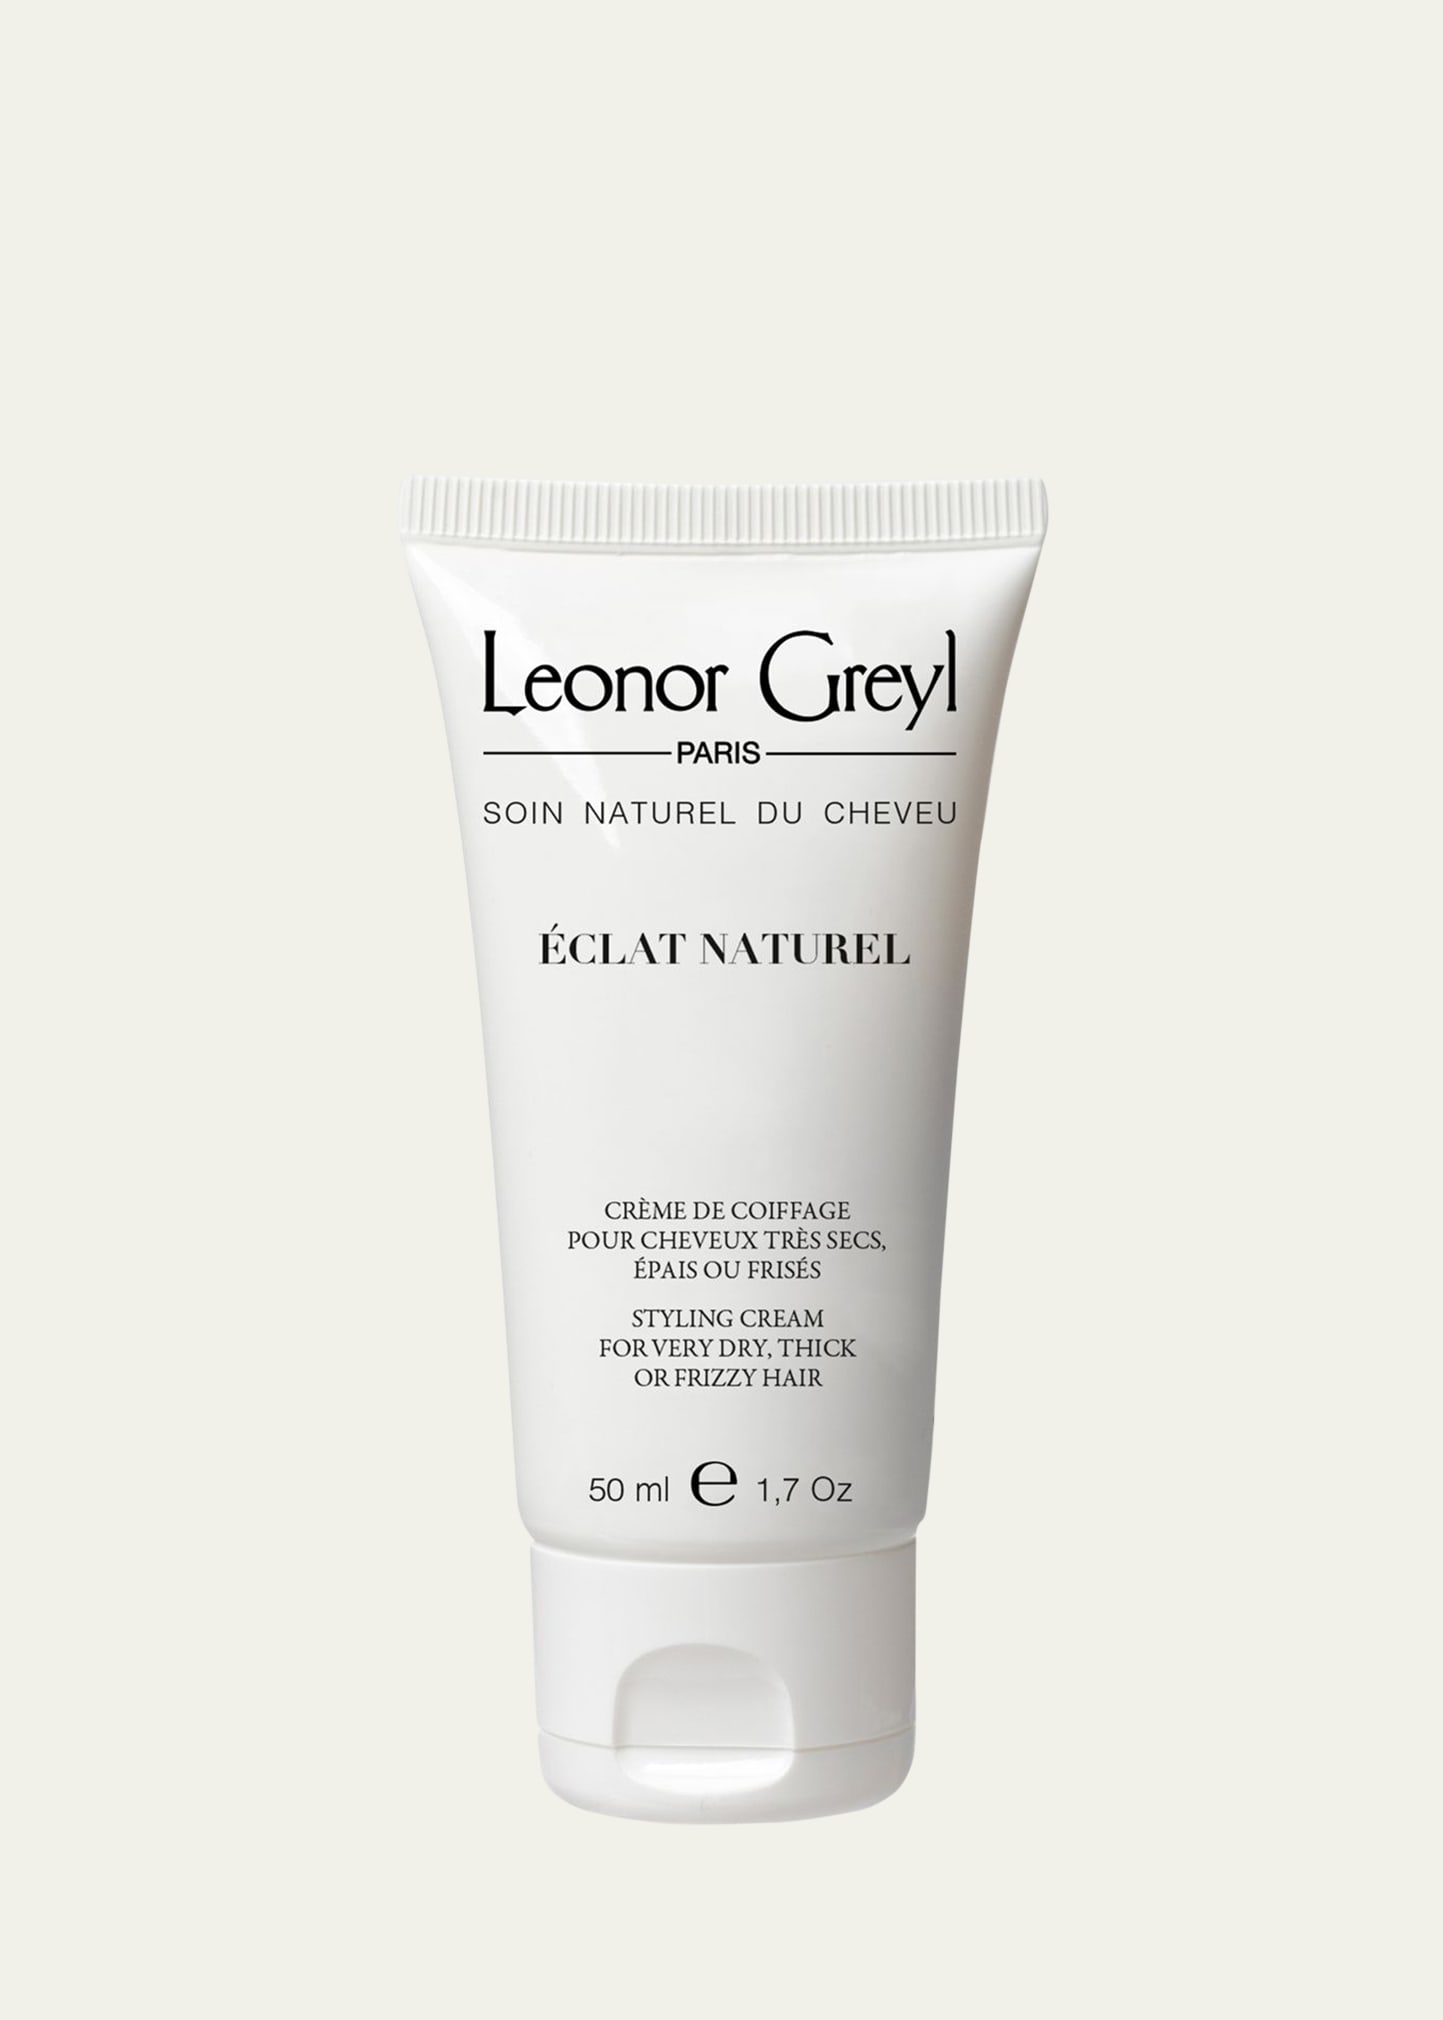 Éclat Naturel (Styling Cream for Very Dry, Thick, or Frizzy Hair),1.7 oz./ 50 mL